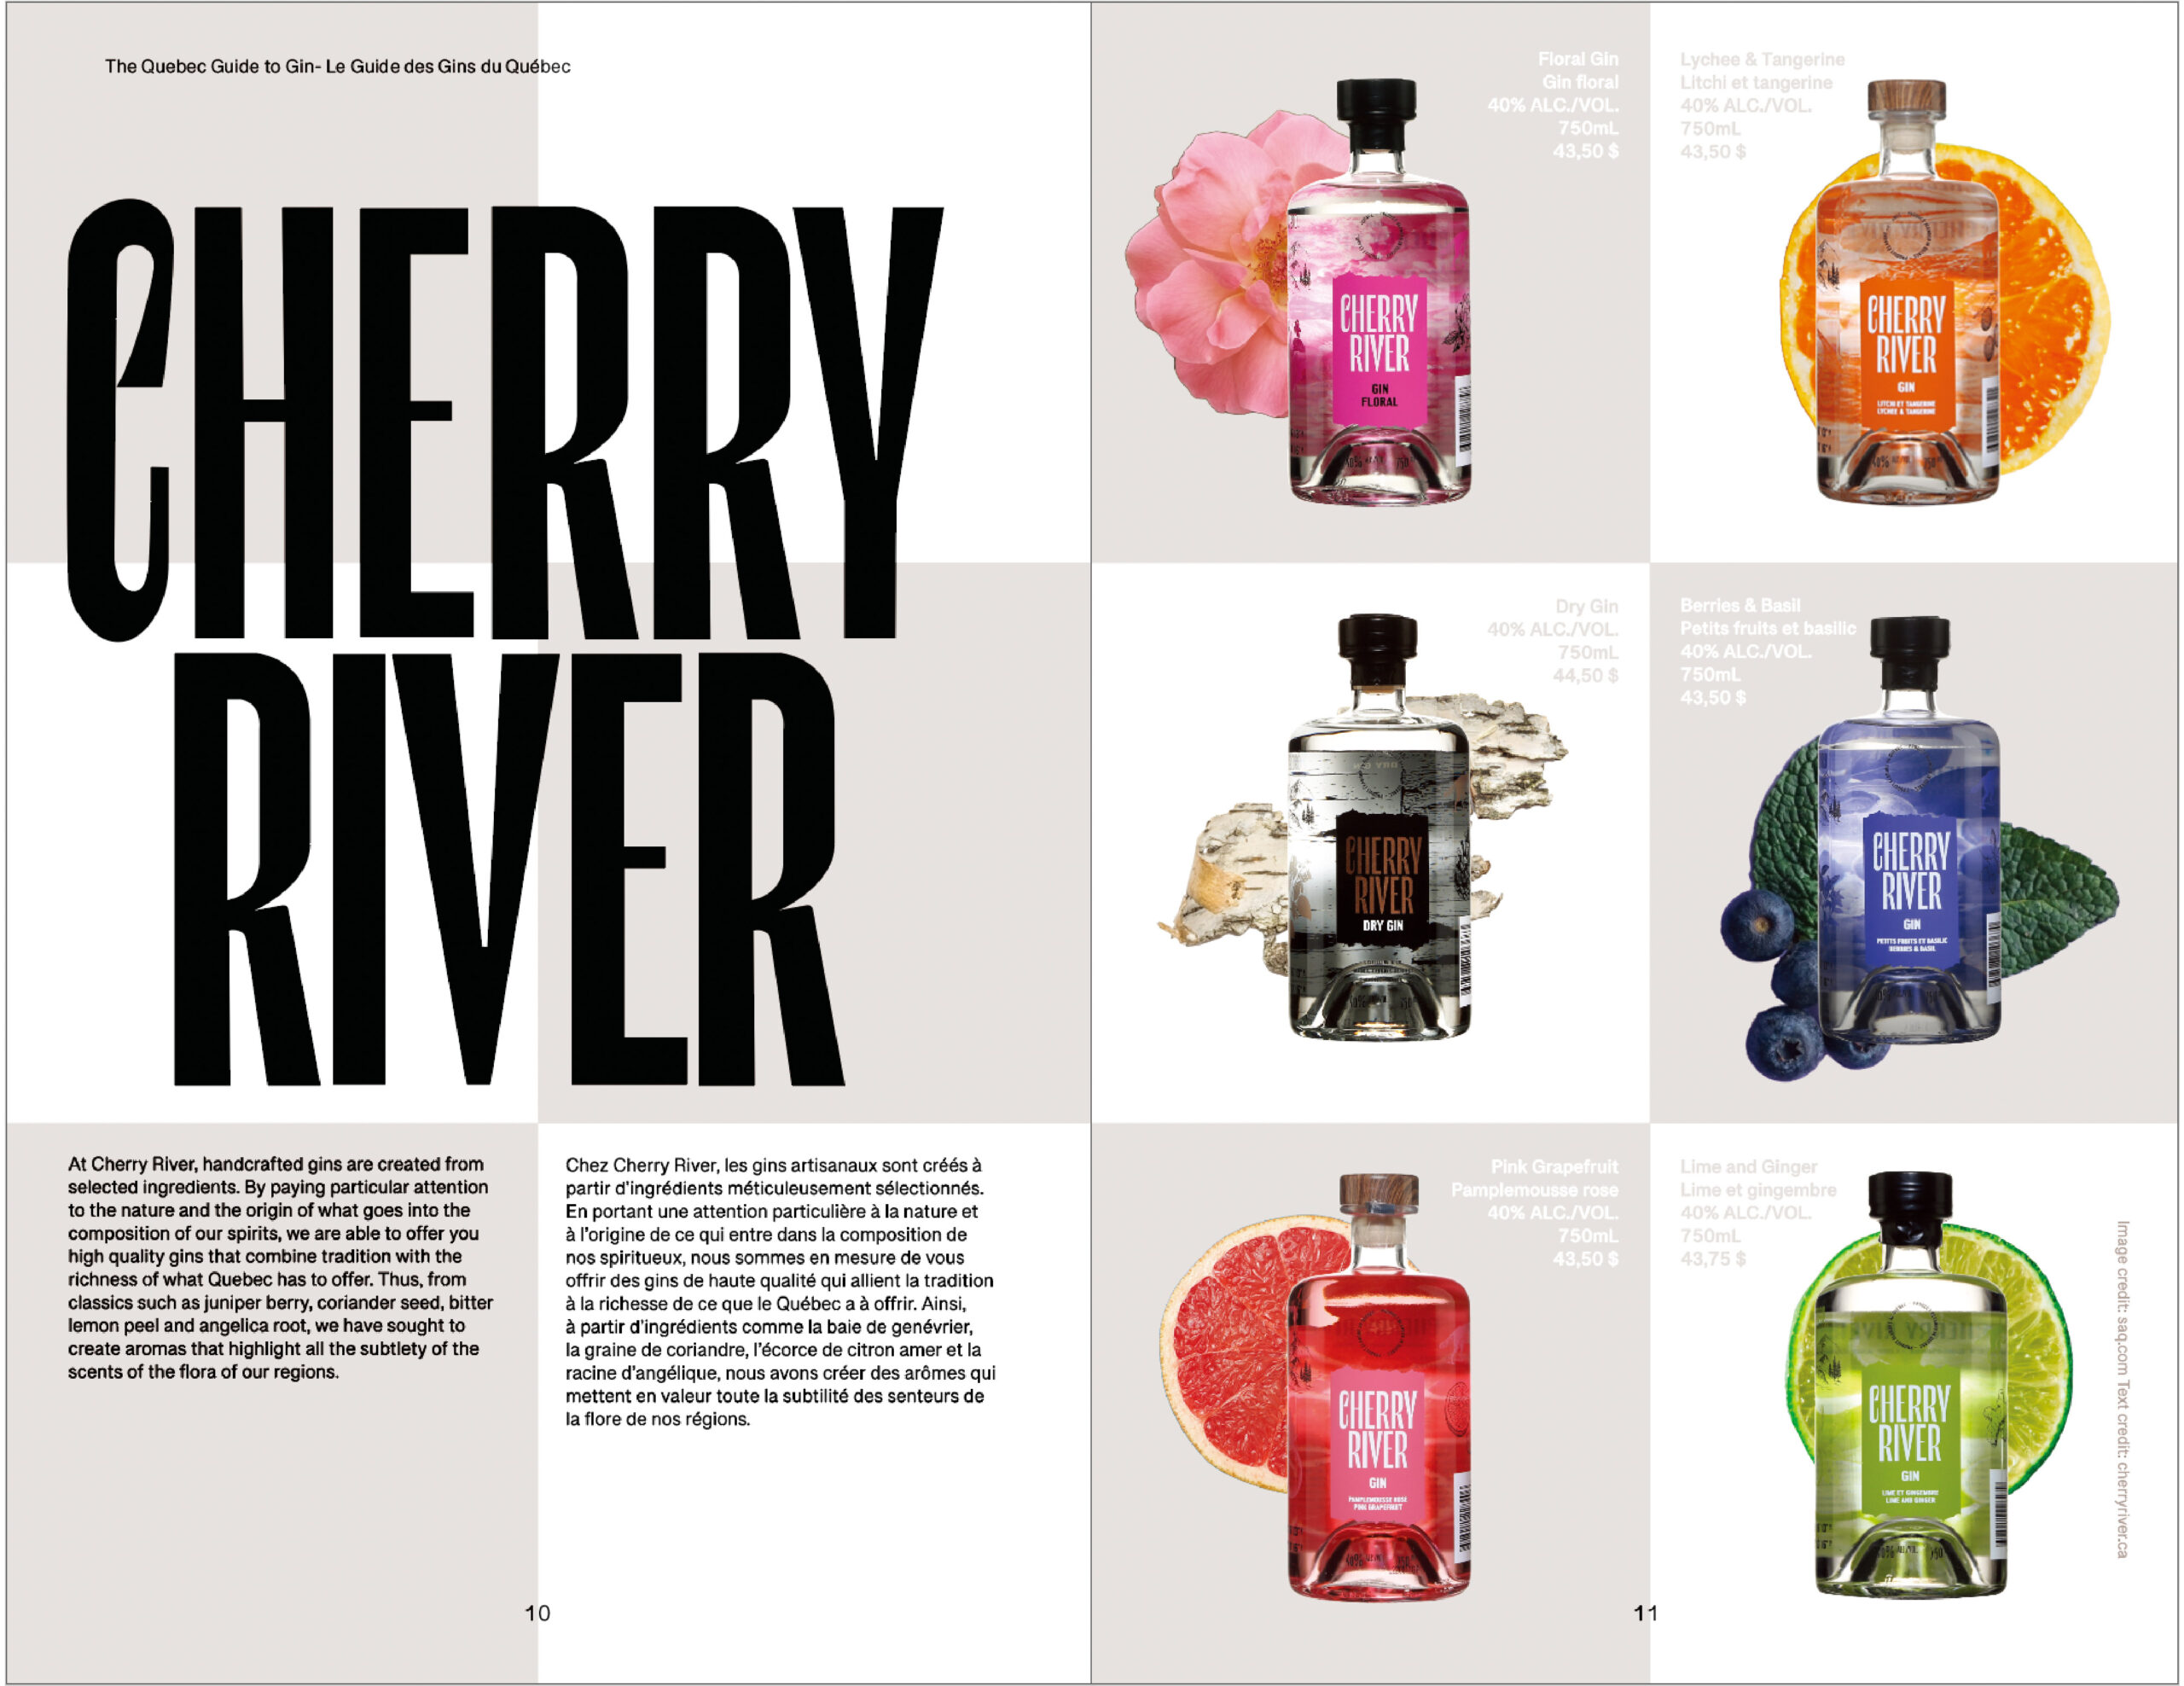 Cherry River Gin presentation layout page with large logo on left page, lightly colored checker board pattern in background and text about the company. On the right page is 6 bottles of differently flavored gins superimposed over different fruit.